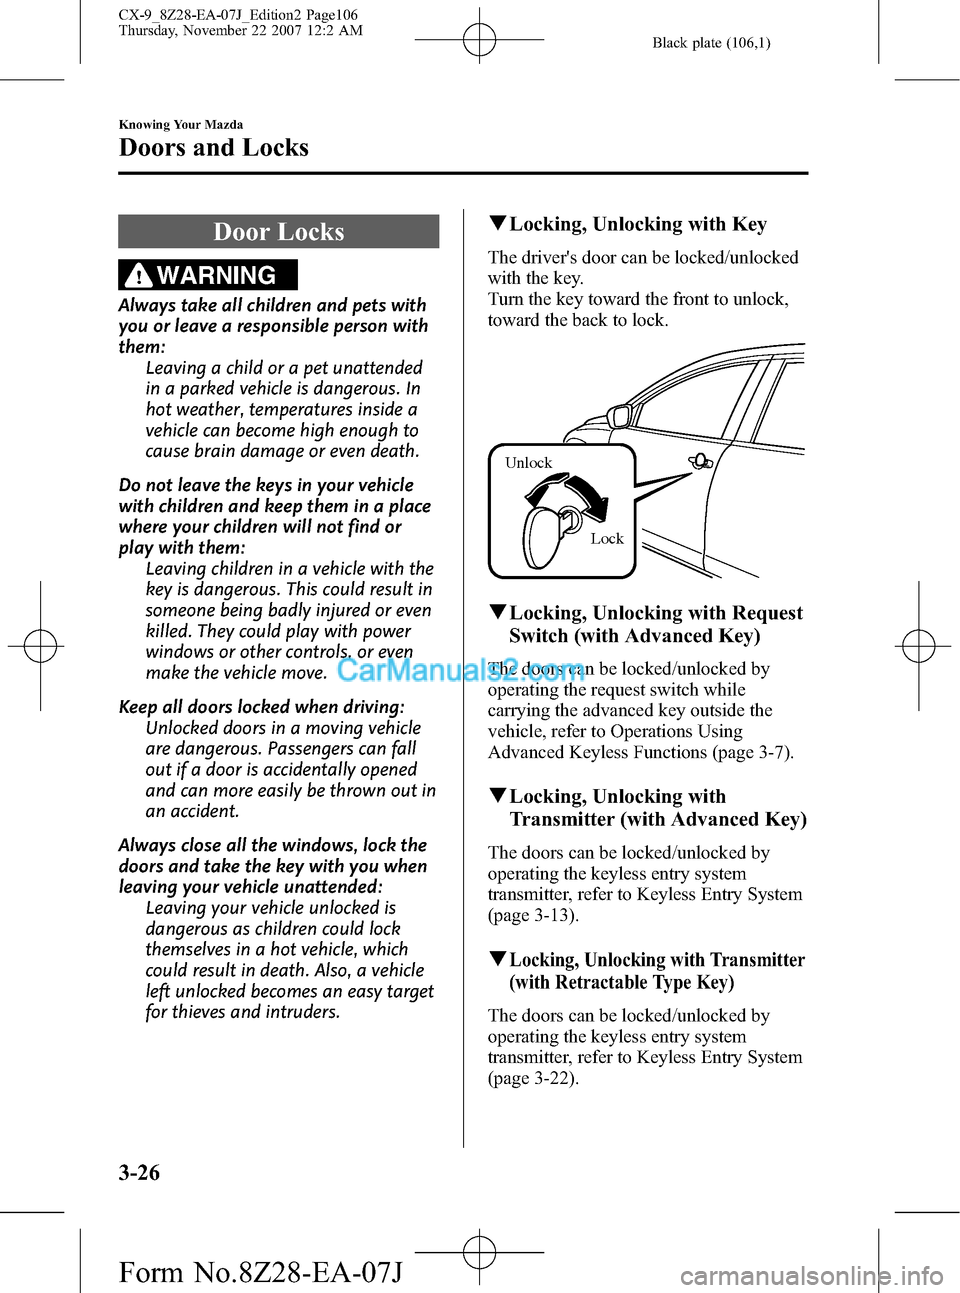 MAZDA MODEL CX-9 2008  Owners Manual (in English) Black plate (106,1)
Door Locks
WARNING
Always take all children and pets with
you or leave a responsible person with
them:
Leaving a child or a pet unattended
in a parked vehicle is dangerous. In
hot 